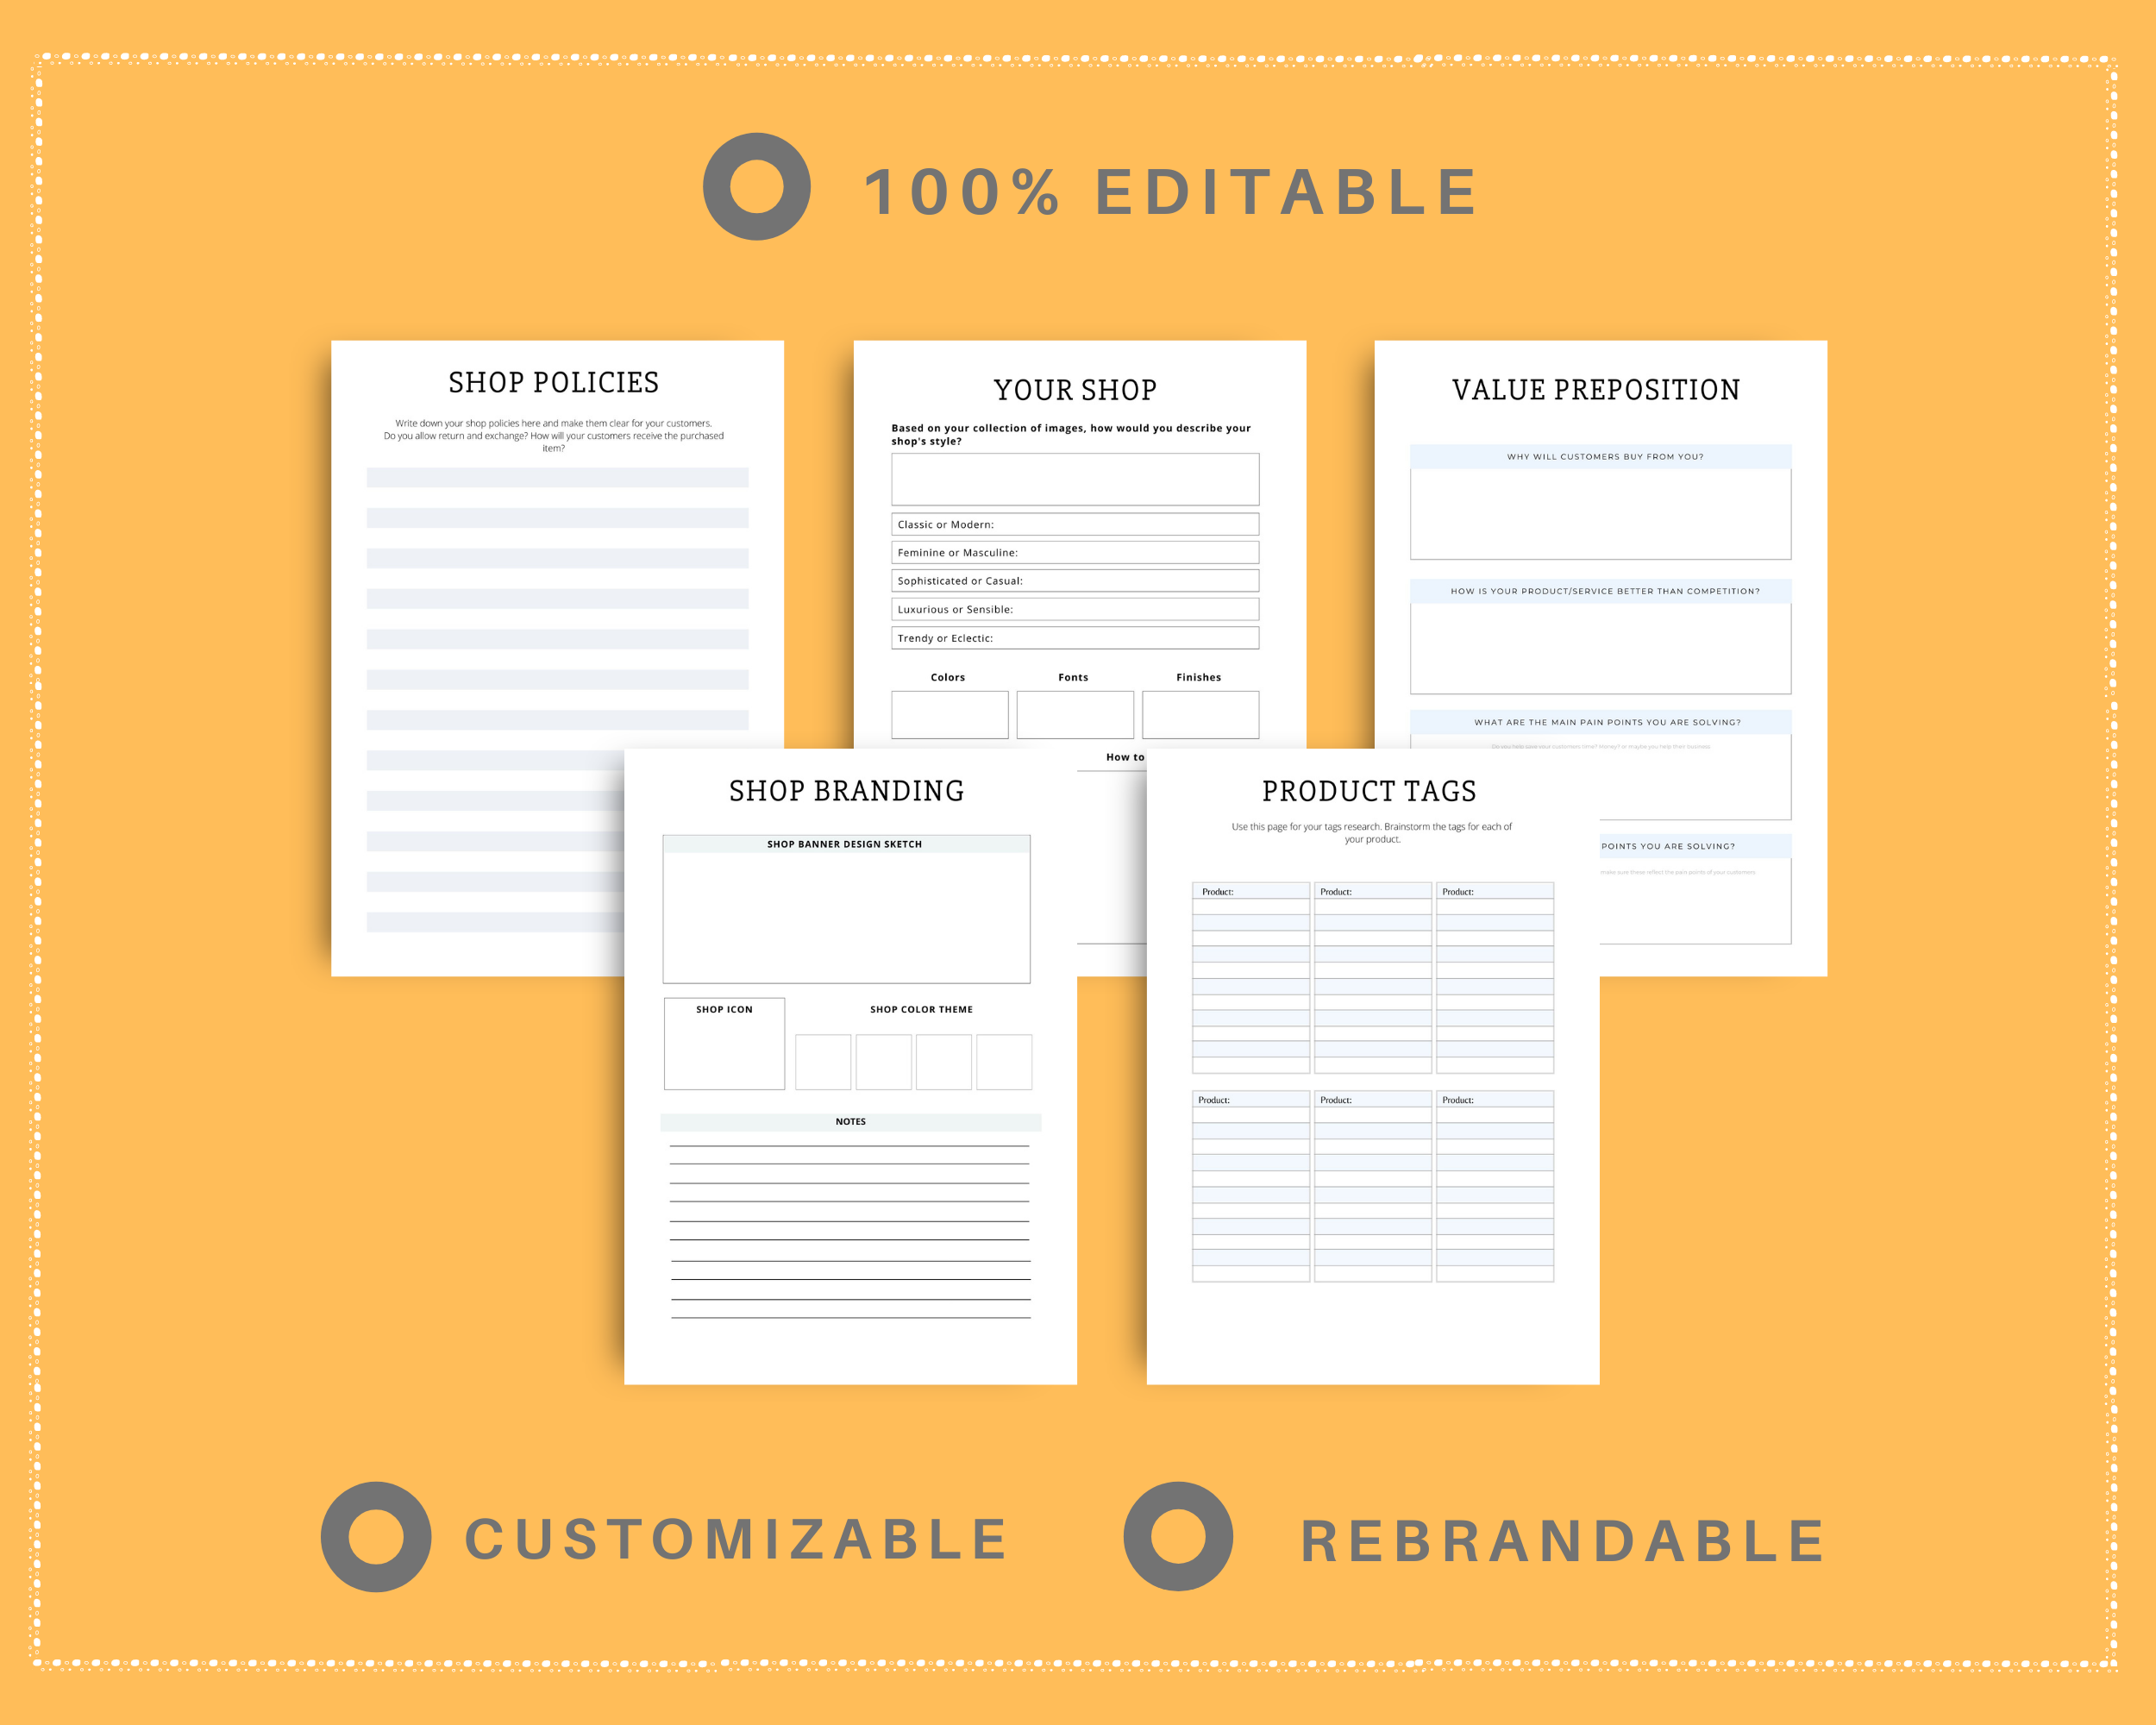 Editable Online Shop Planner Templates in Canva | Commercial Use